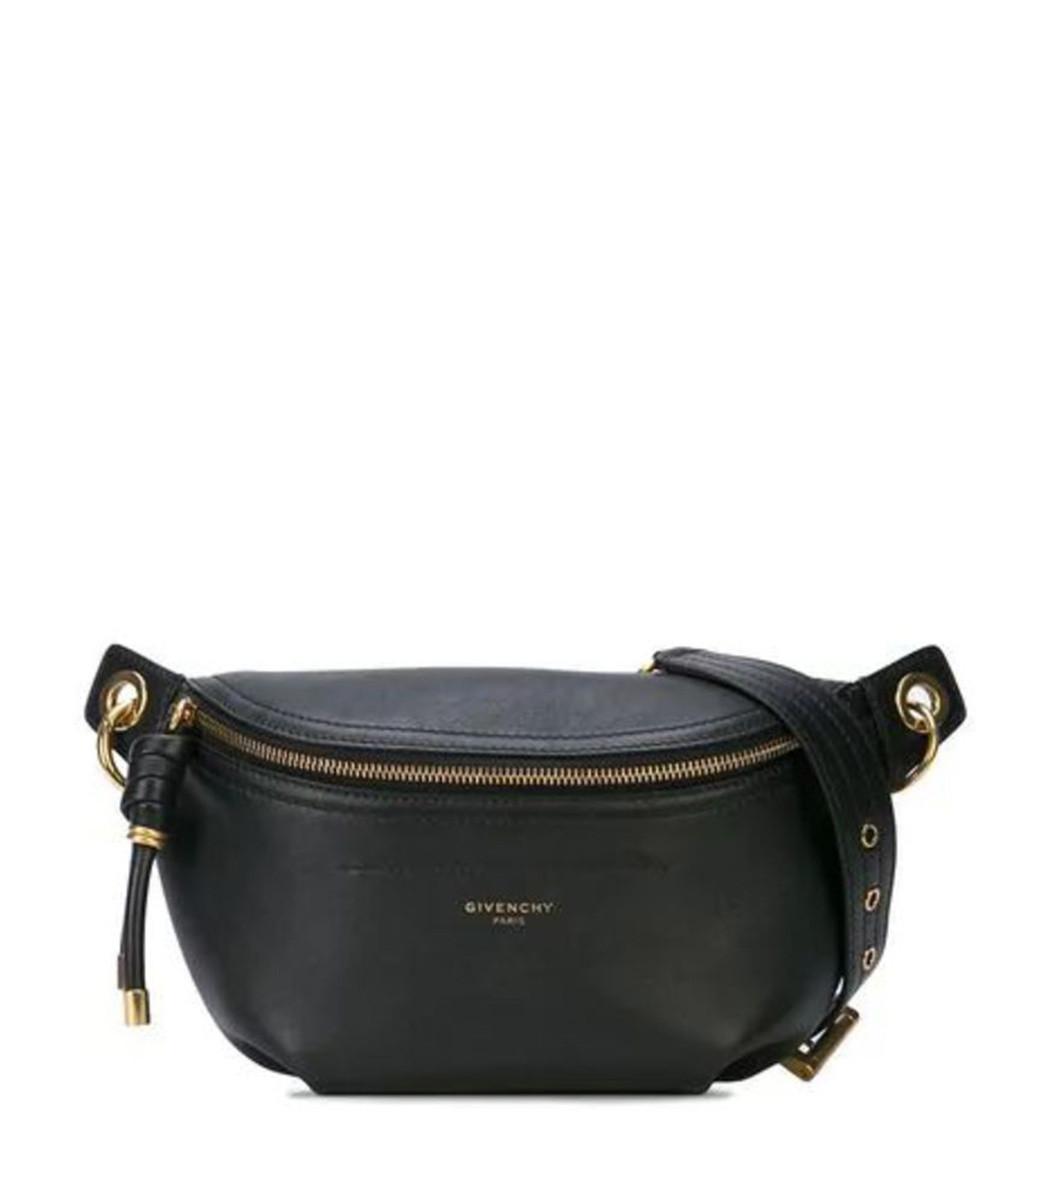 Givenchy Chain Strap Belt Bag in Black - Save 30% - Lyst